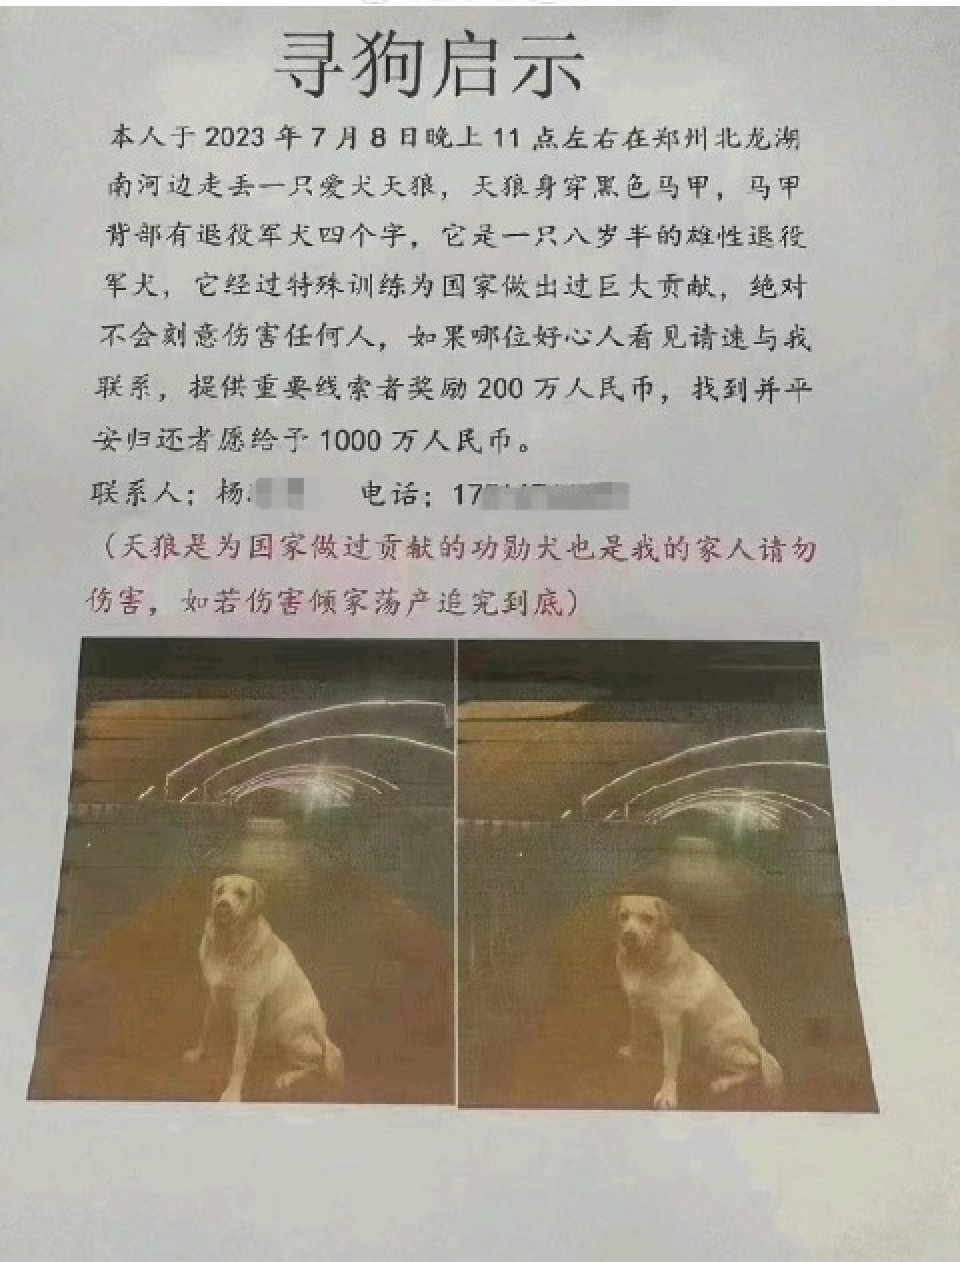 The pet’s owner claimed the dog was ex-military and had “made contributions to the nation”. Photo: Weibo